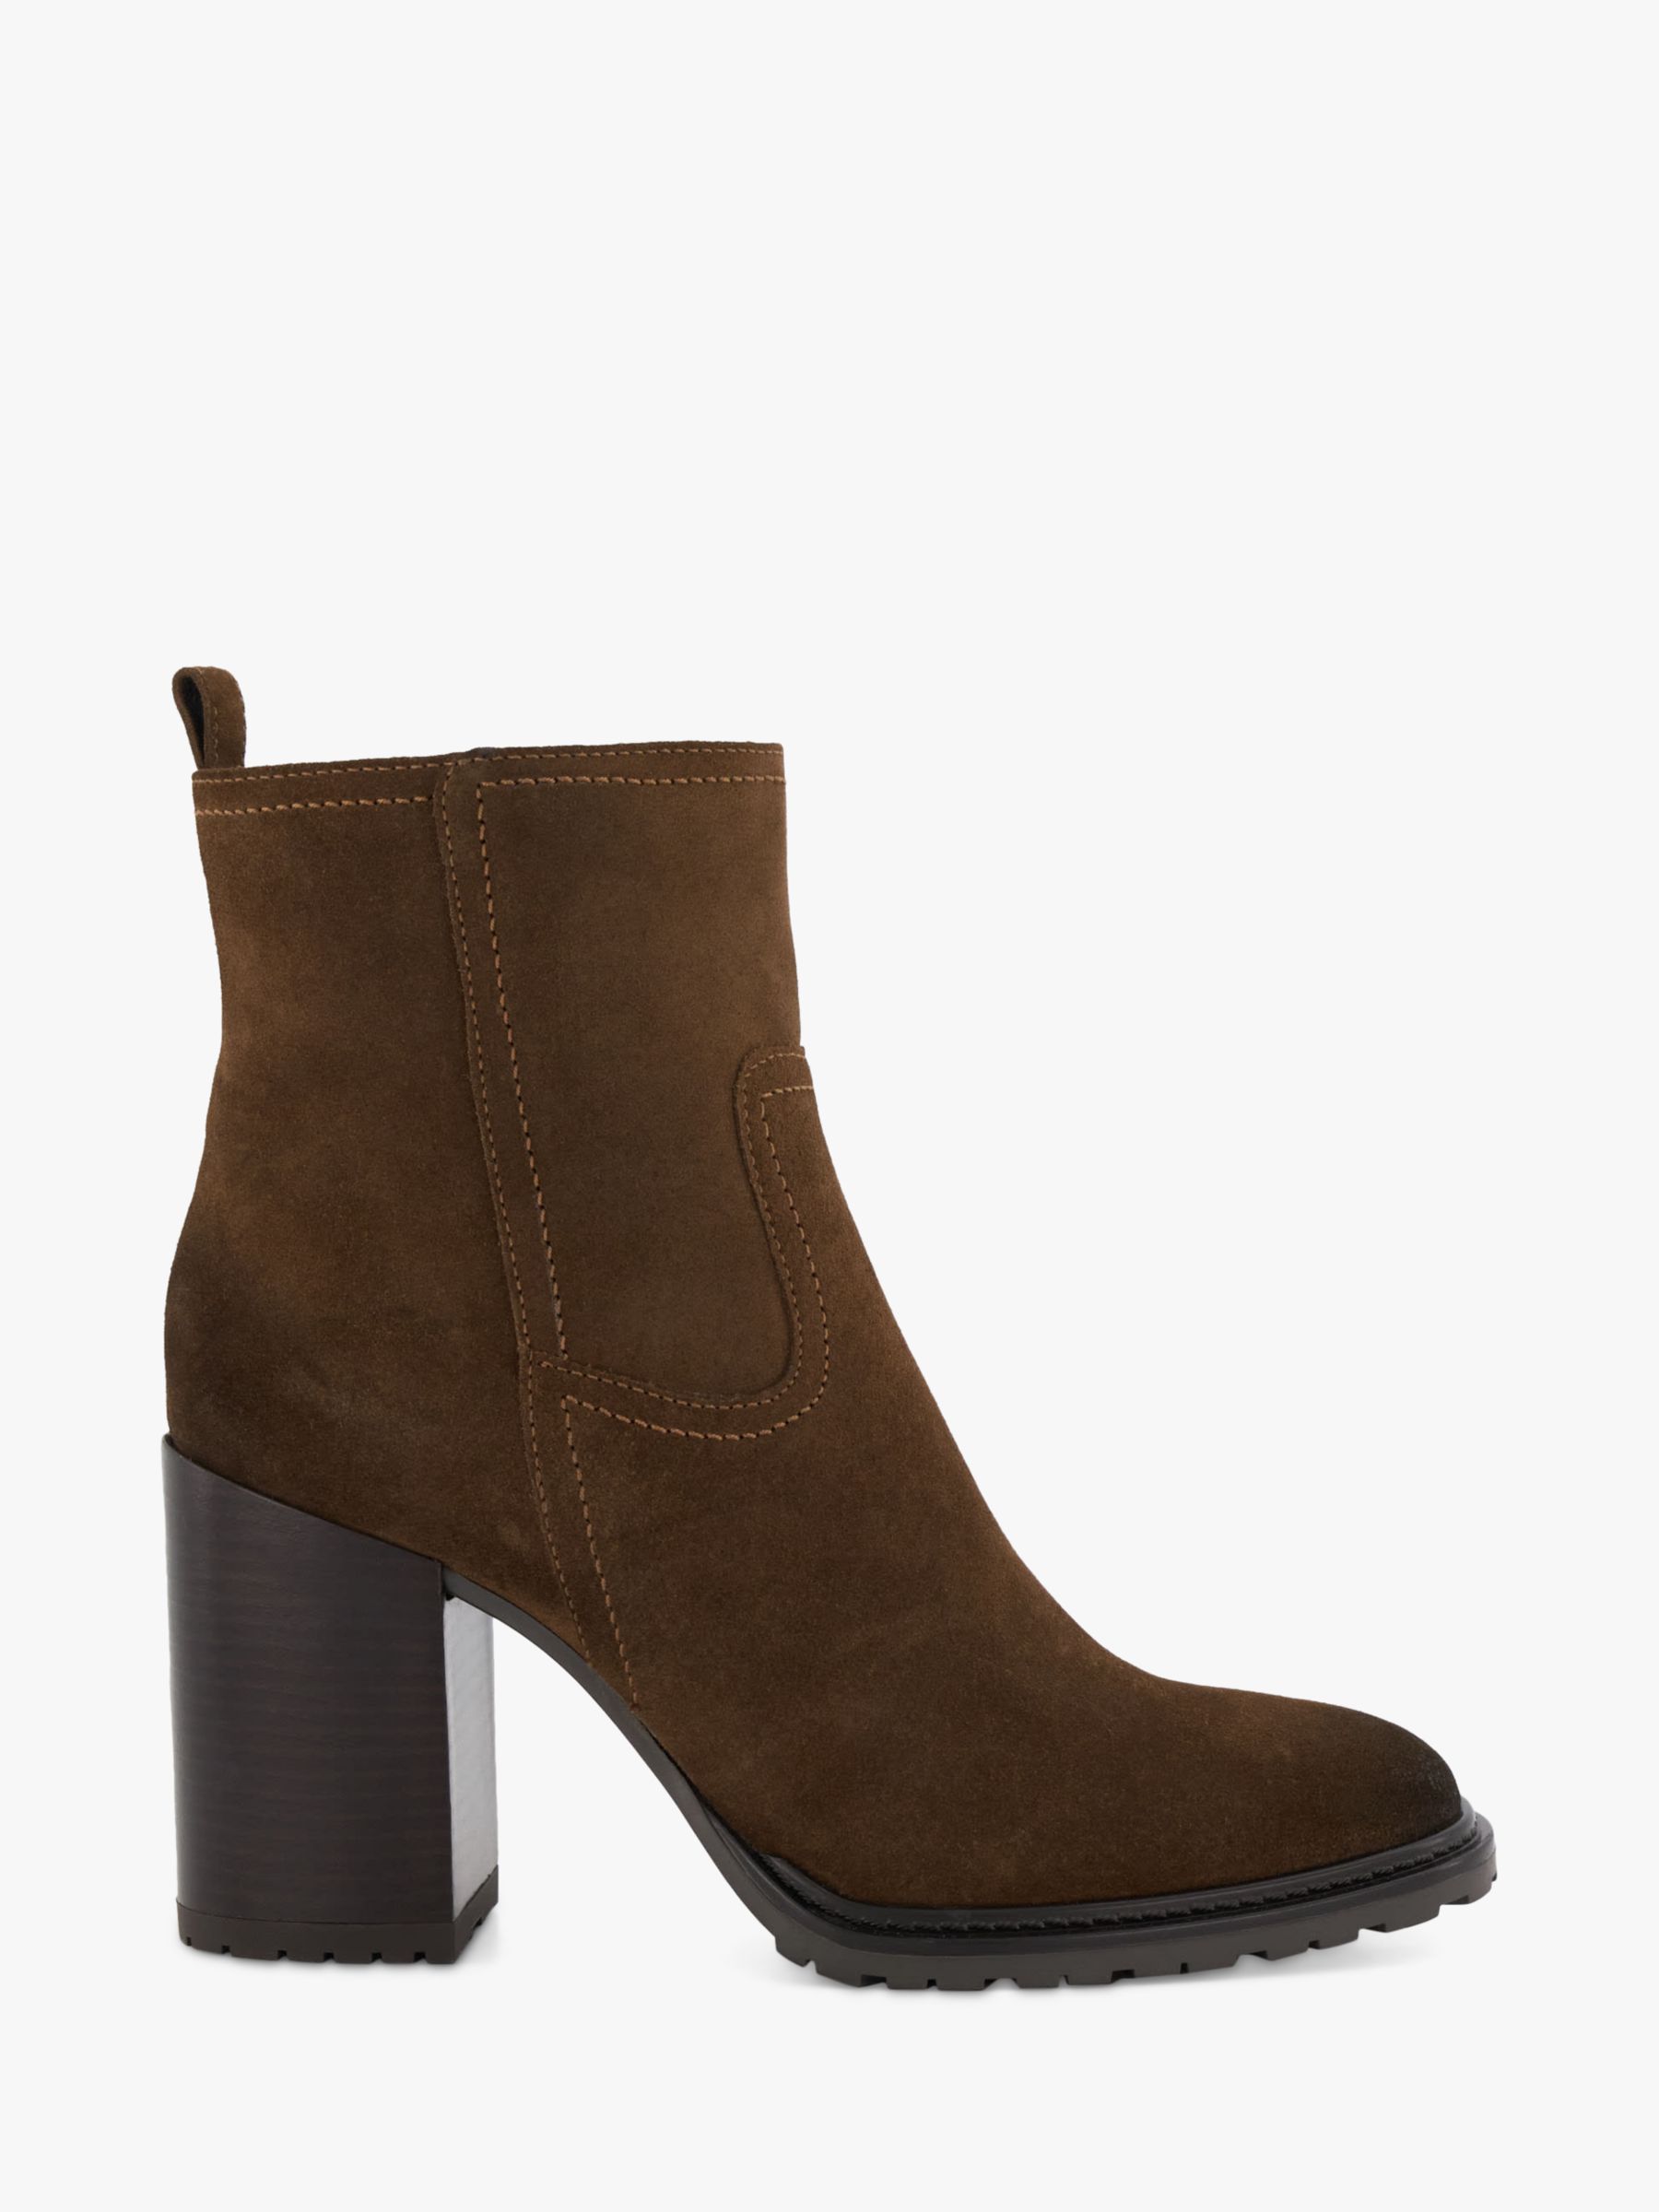 Dune Peng Suede Heeled Ankle Boots, Brown at John Lewis & Partners